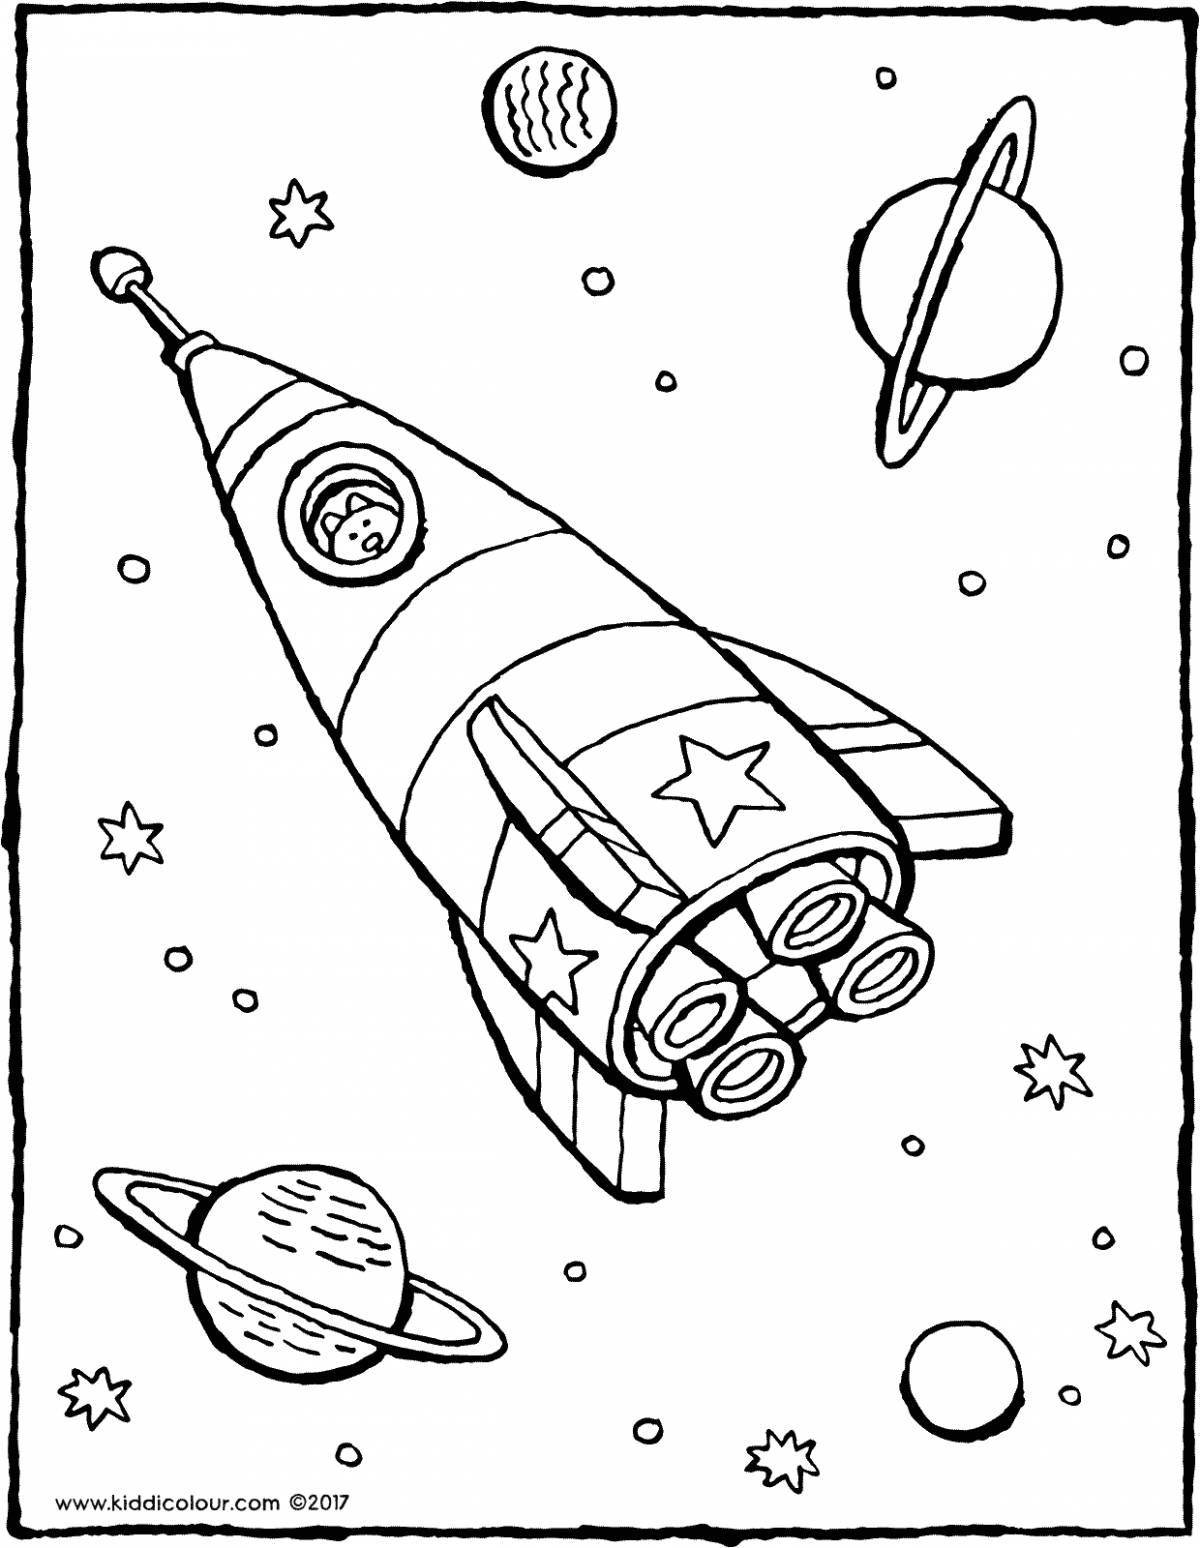 Amazing rockets in space for kids